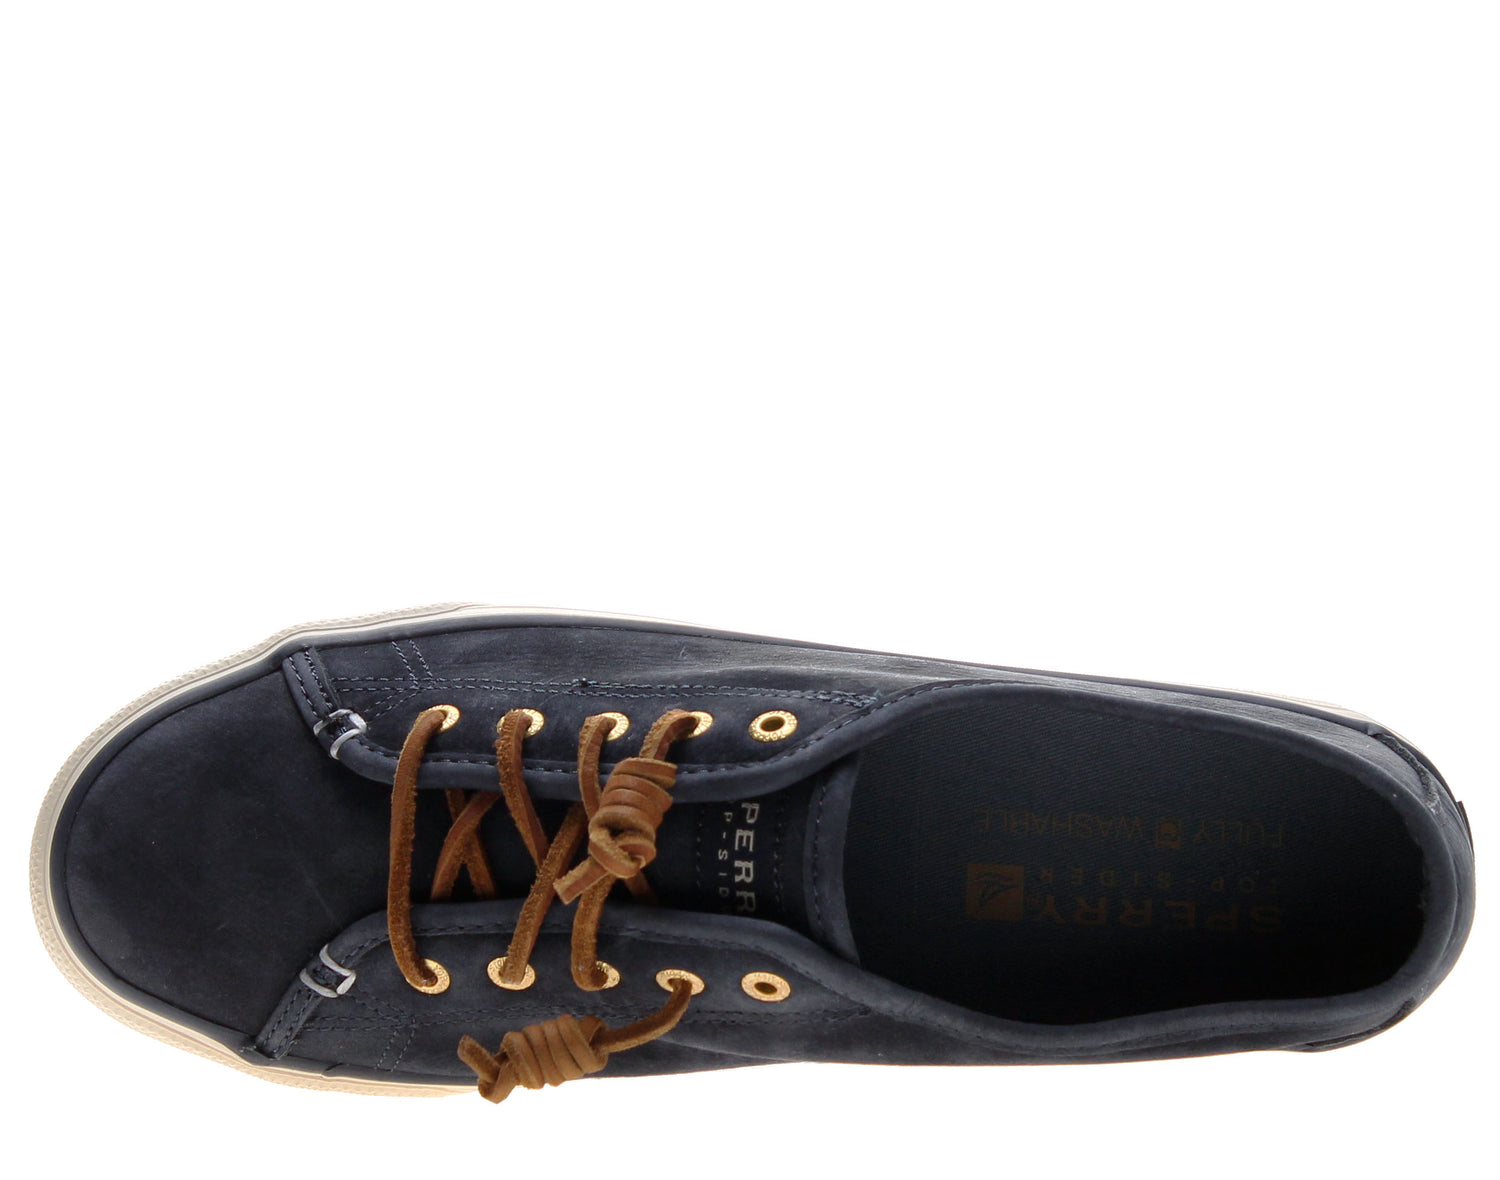 Sperry Top Sider Seacoast Nubuck Casual Women's Shoes